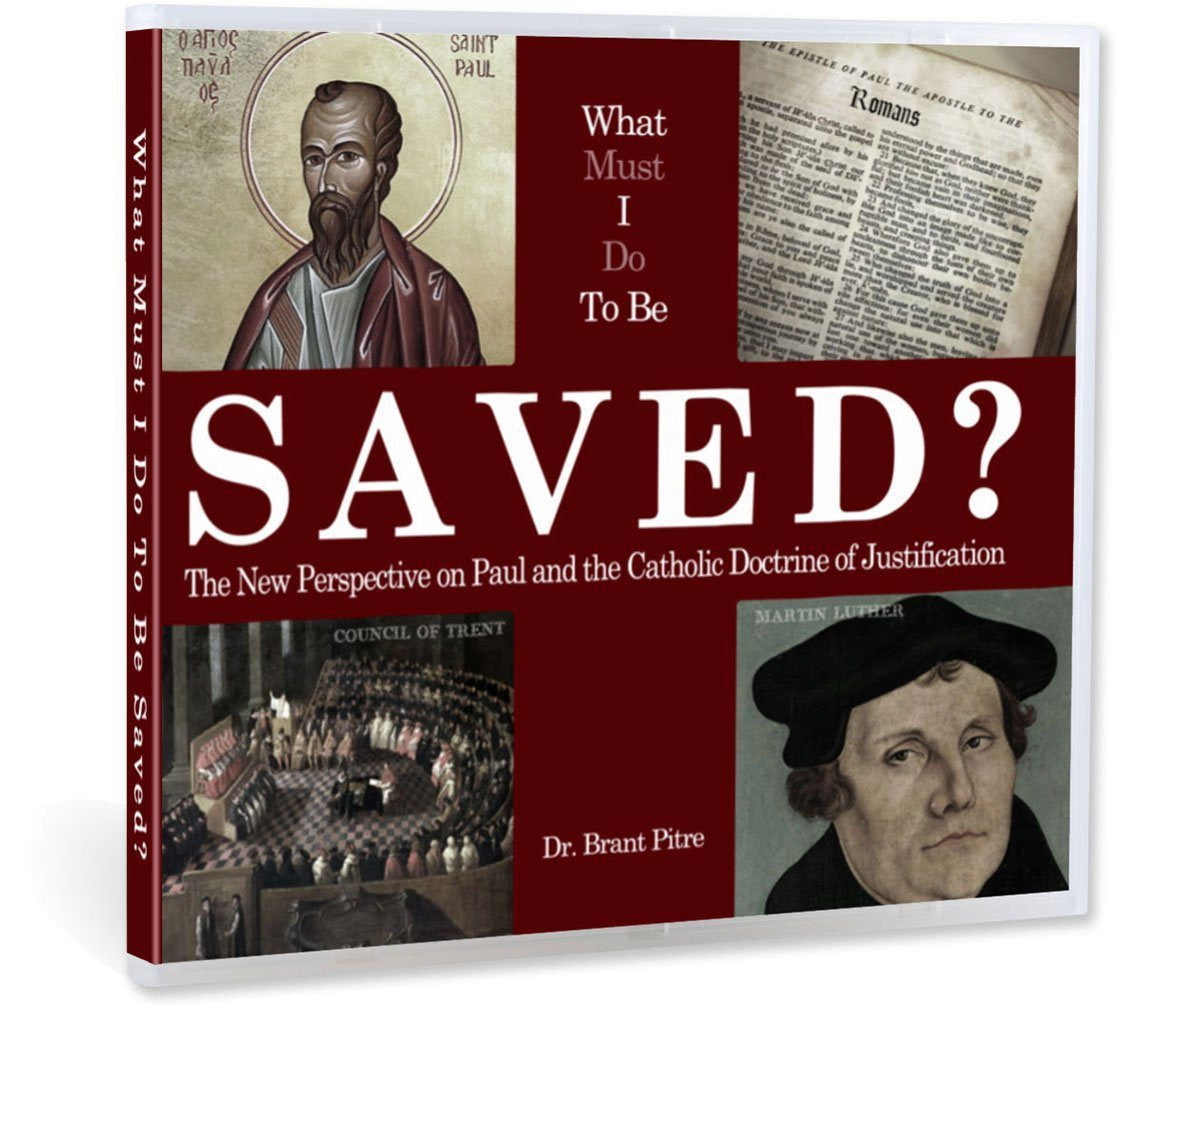 What is the "New Perspective" on Paul and are contemporary protestant scholars shifting towards the Catholic understanding of justification? (CD)